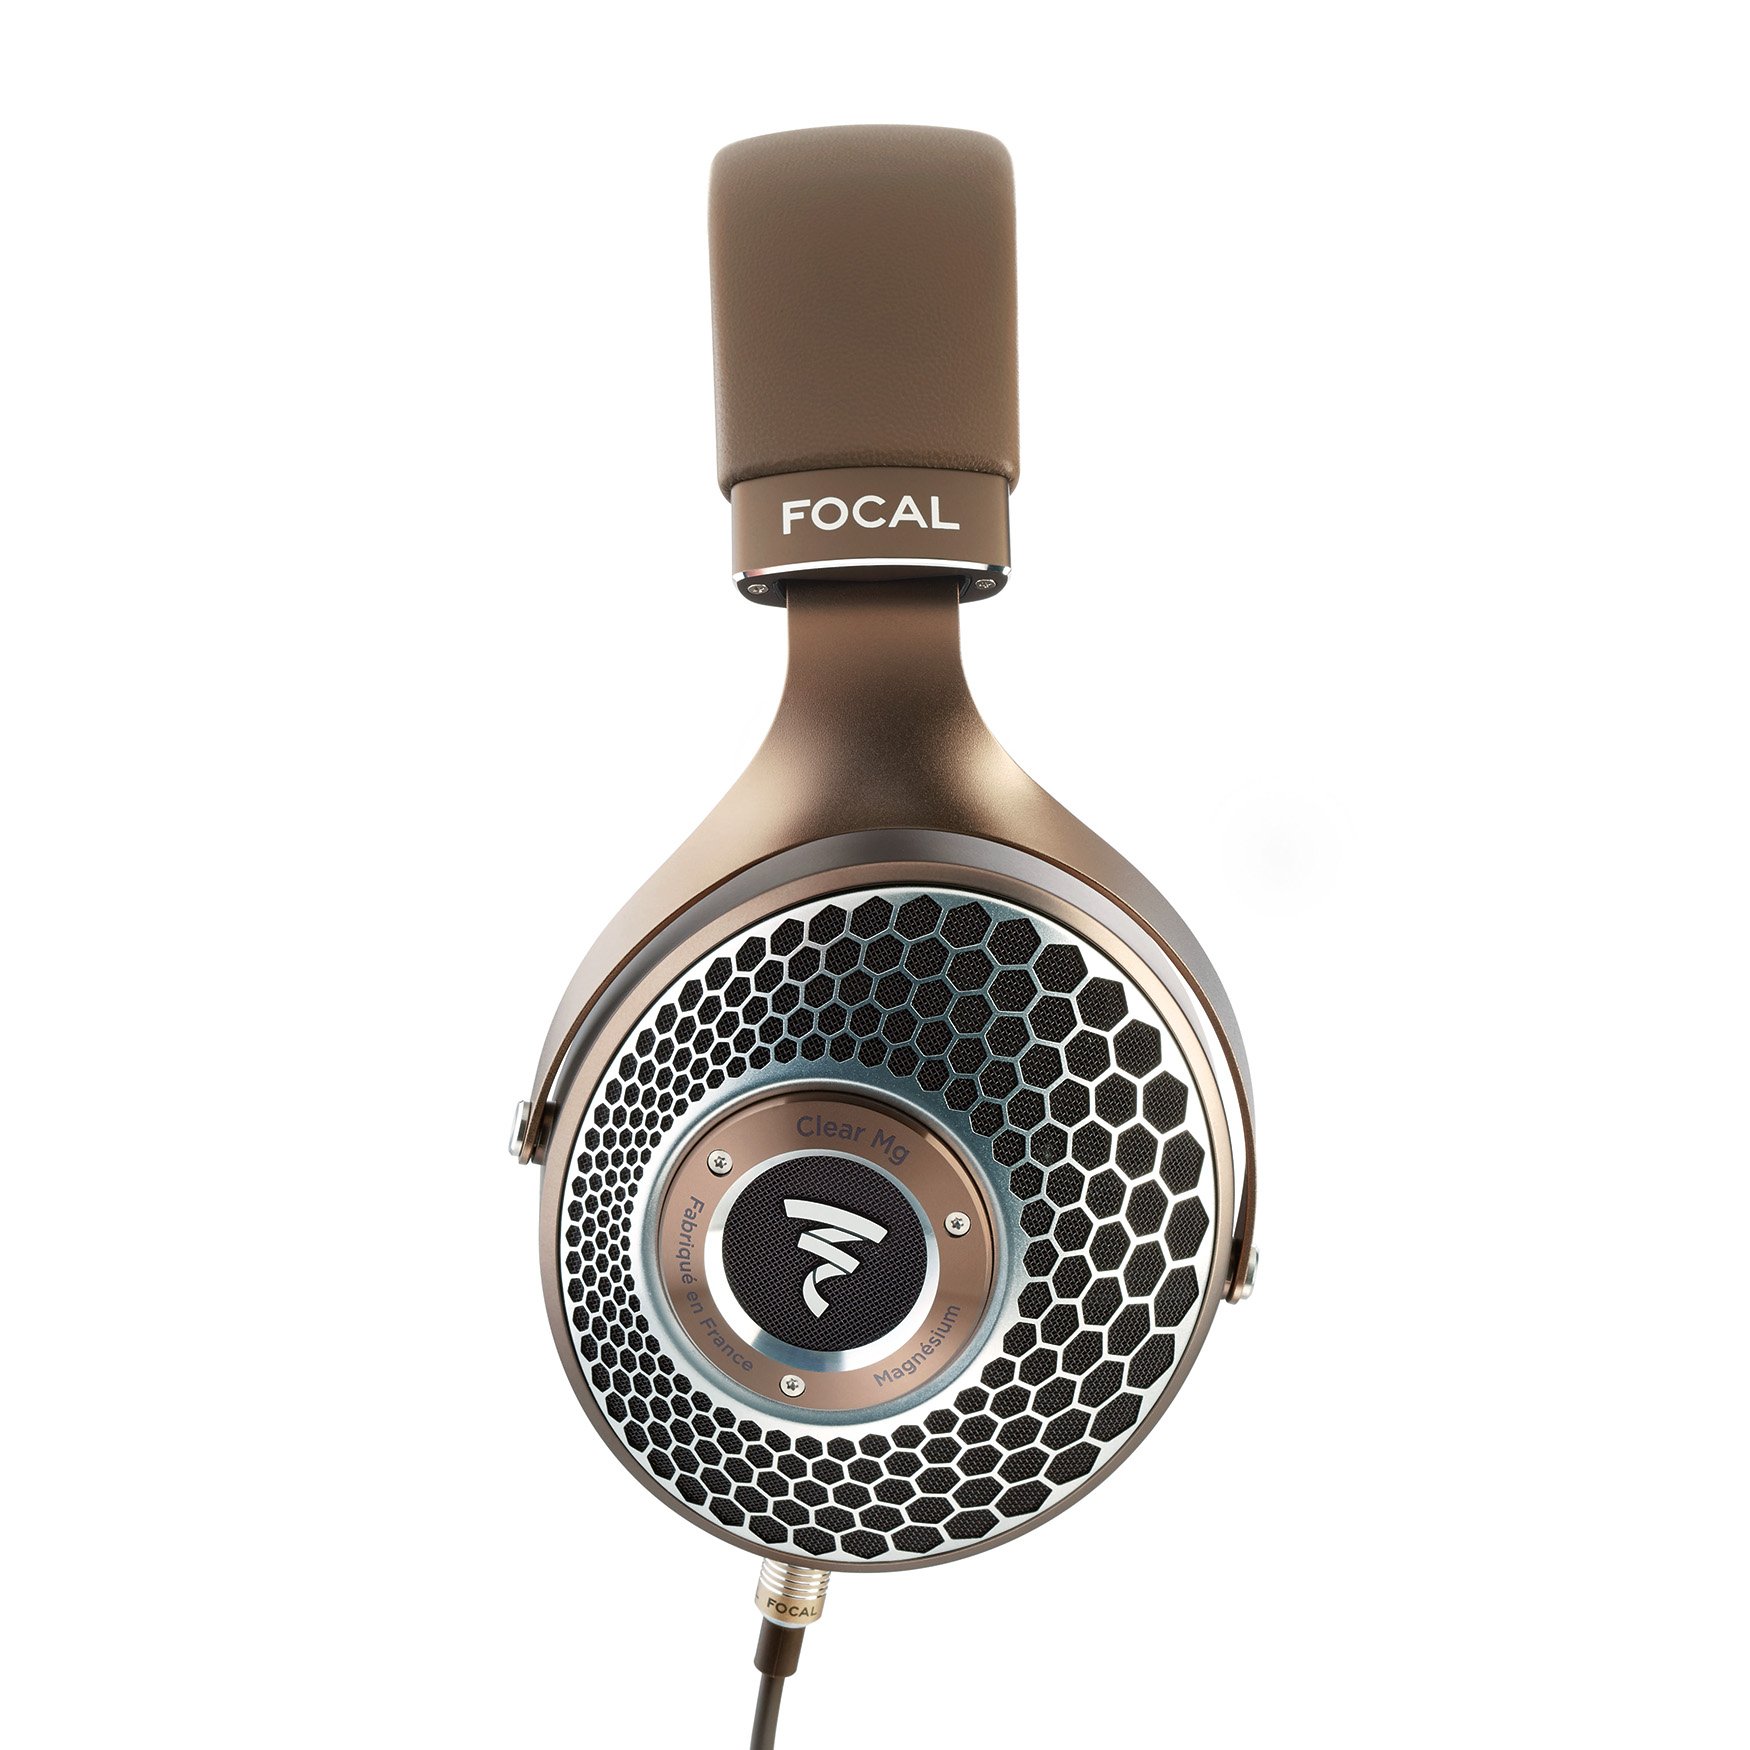 Focal Clear Mg - $1,999